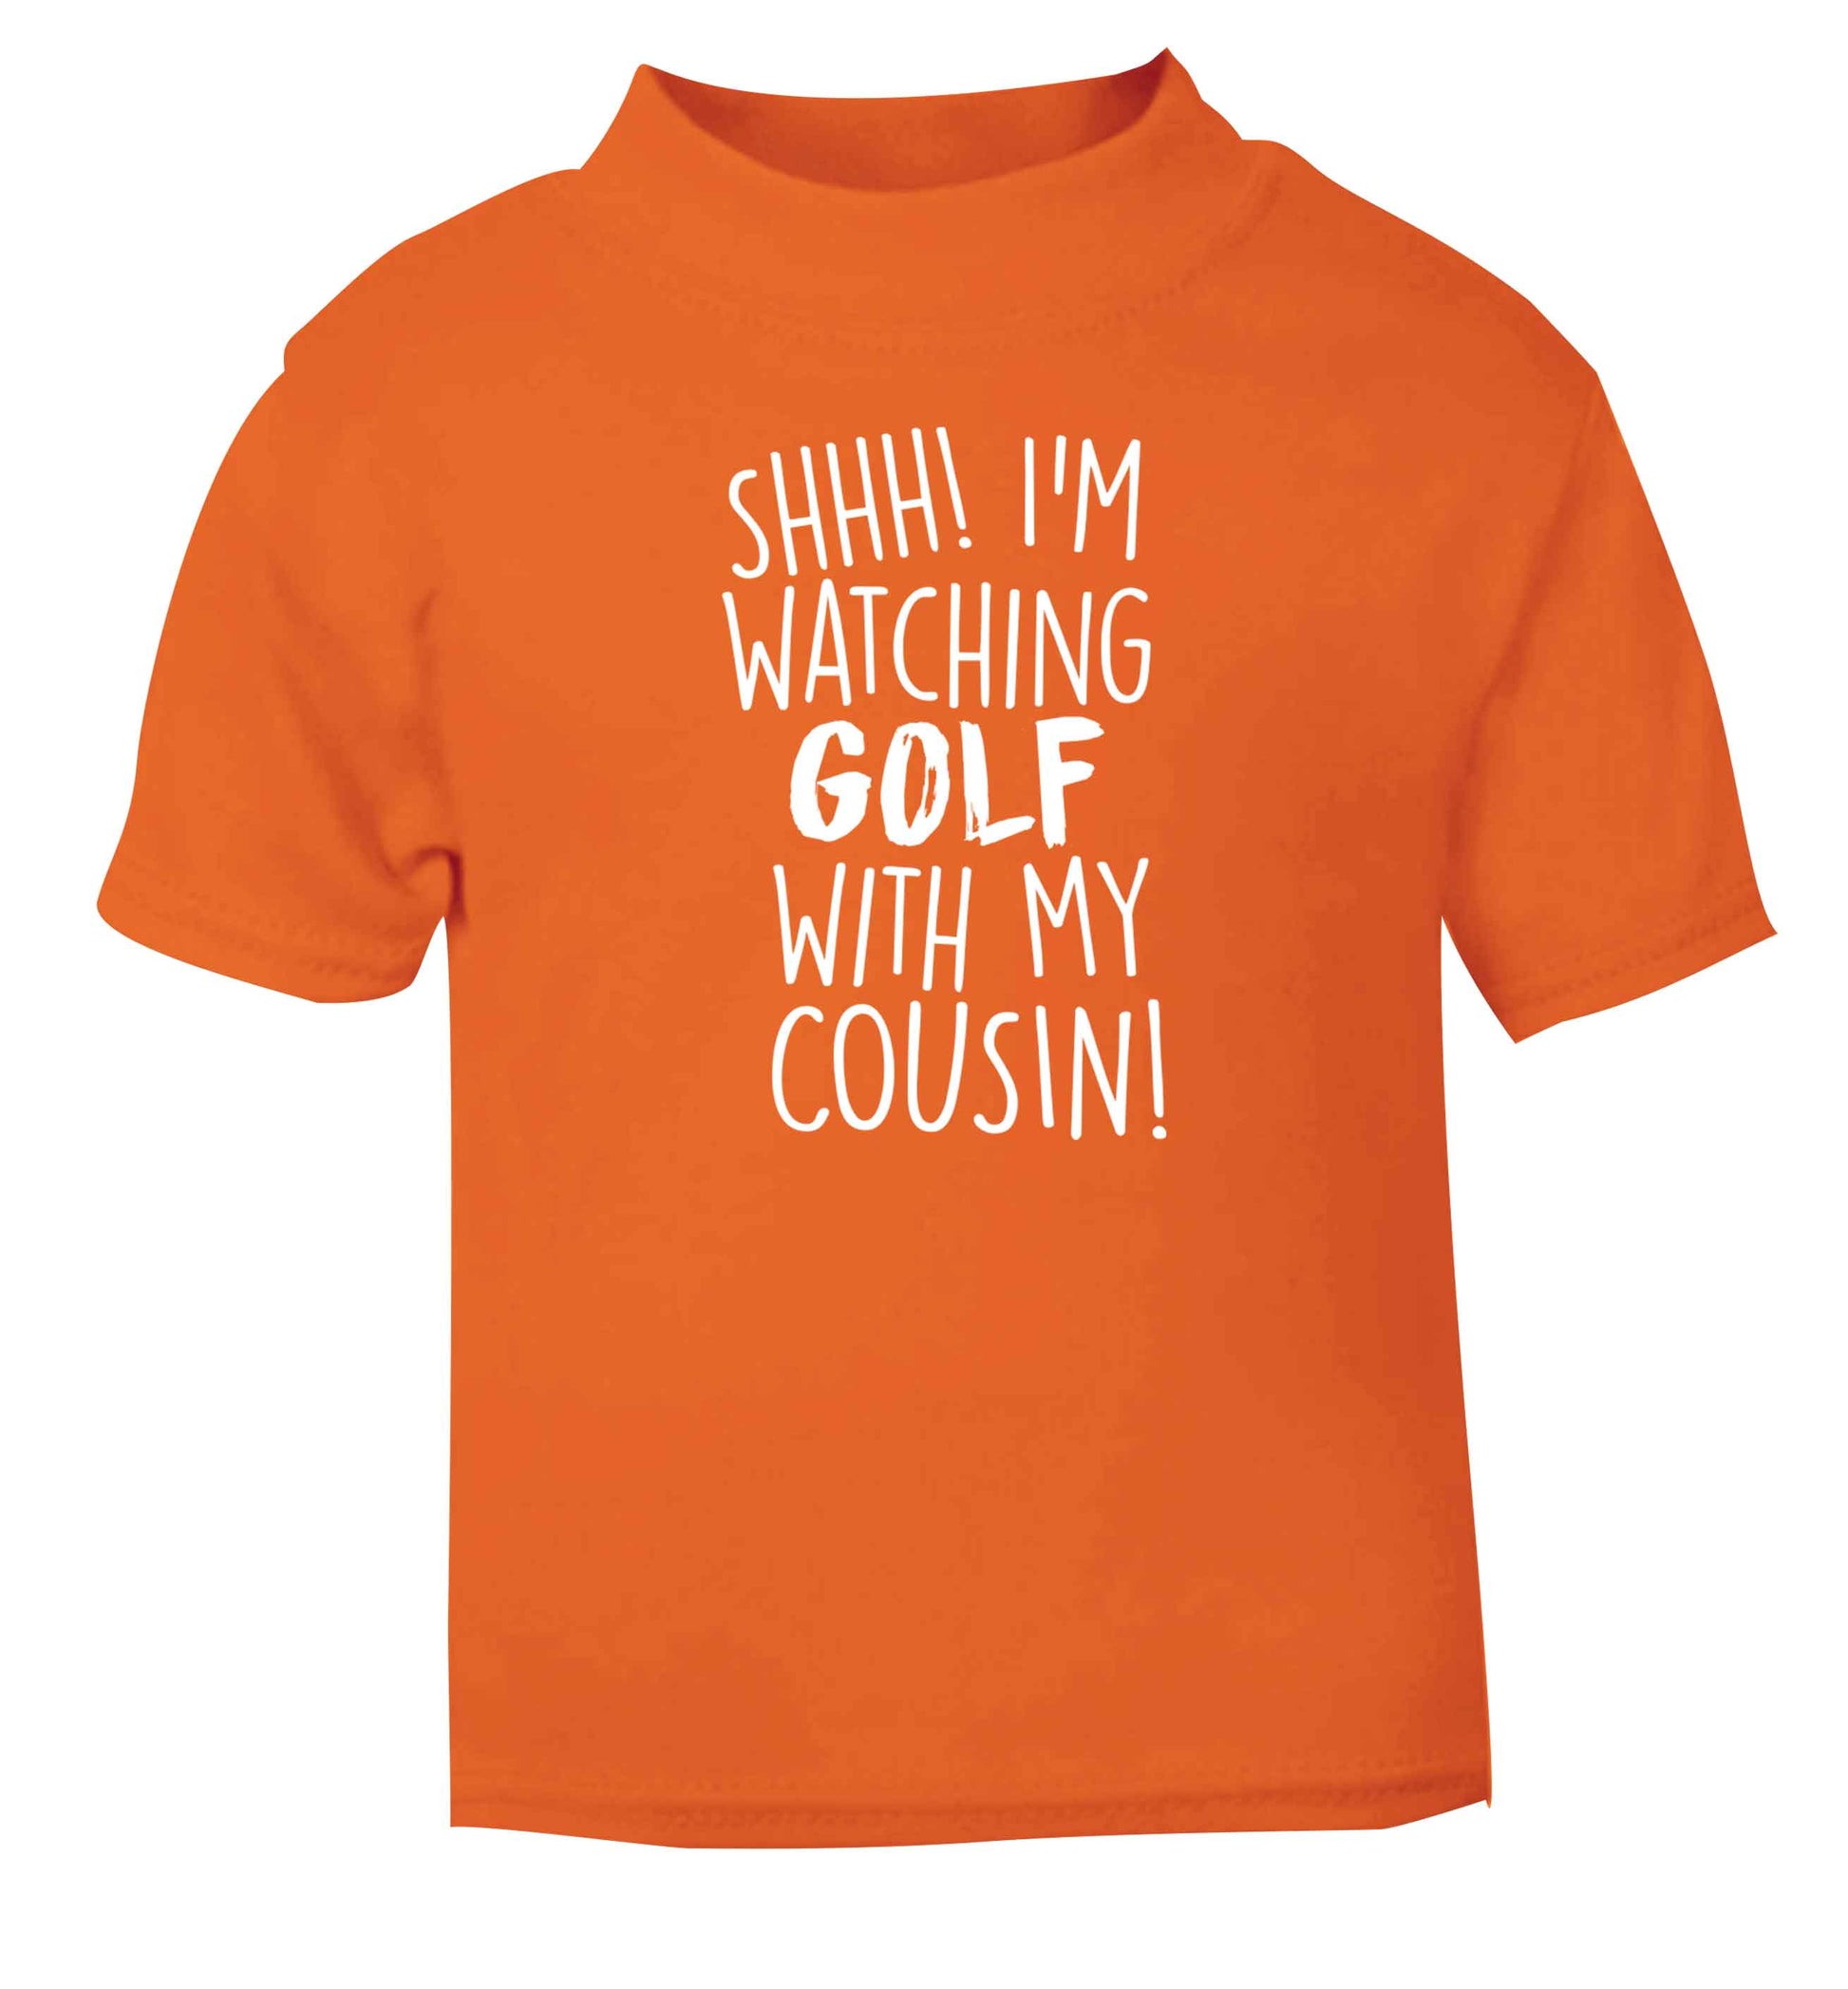 Shh I'm watching golf with my cousin orange Baby Toddler Tshirt 2 Years